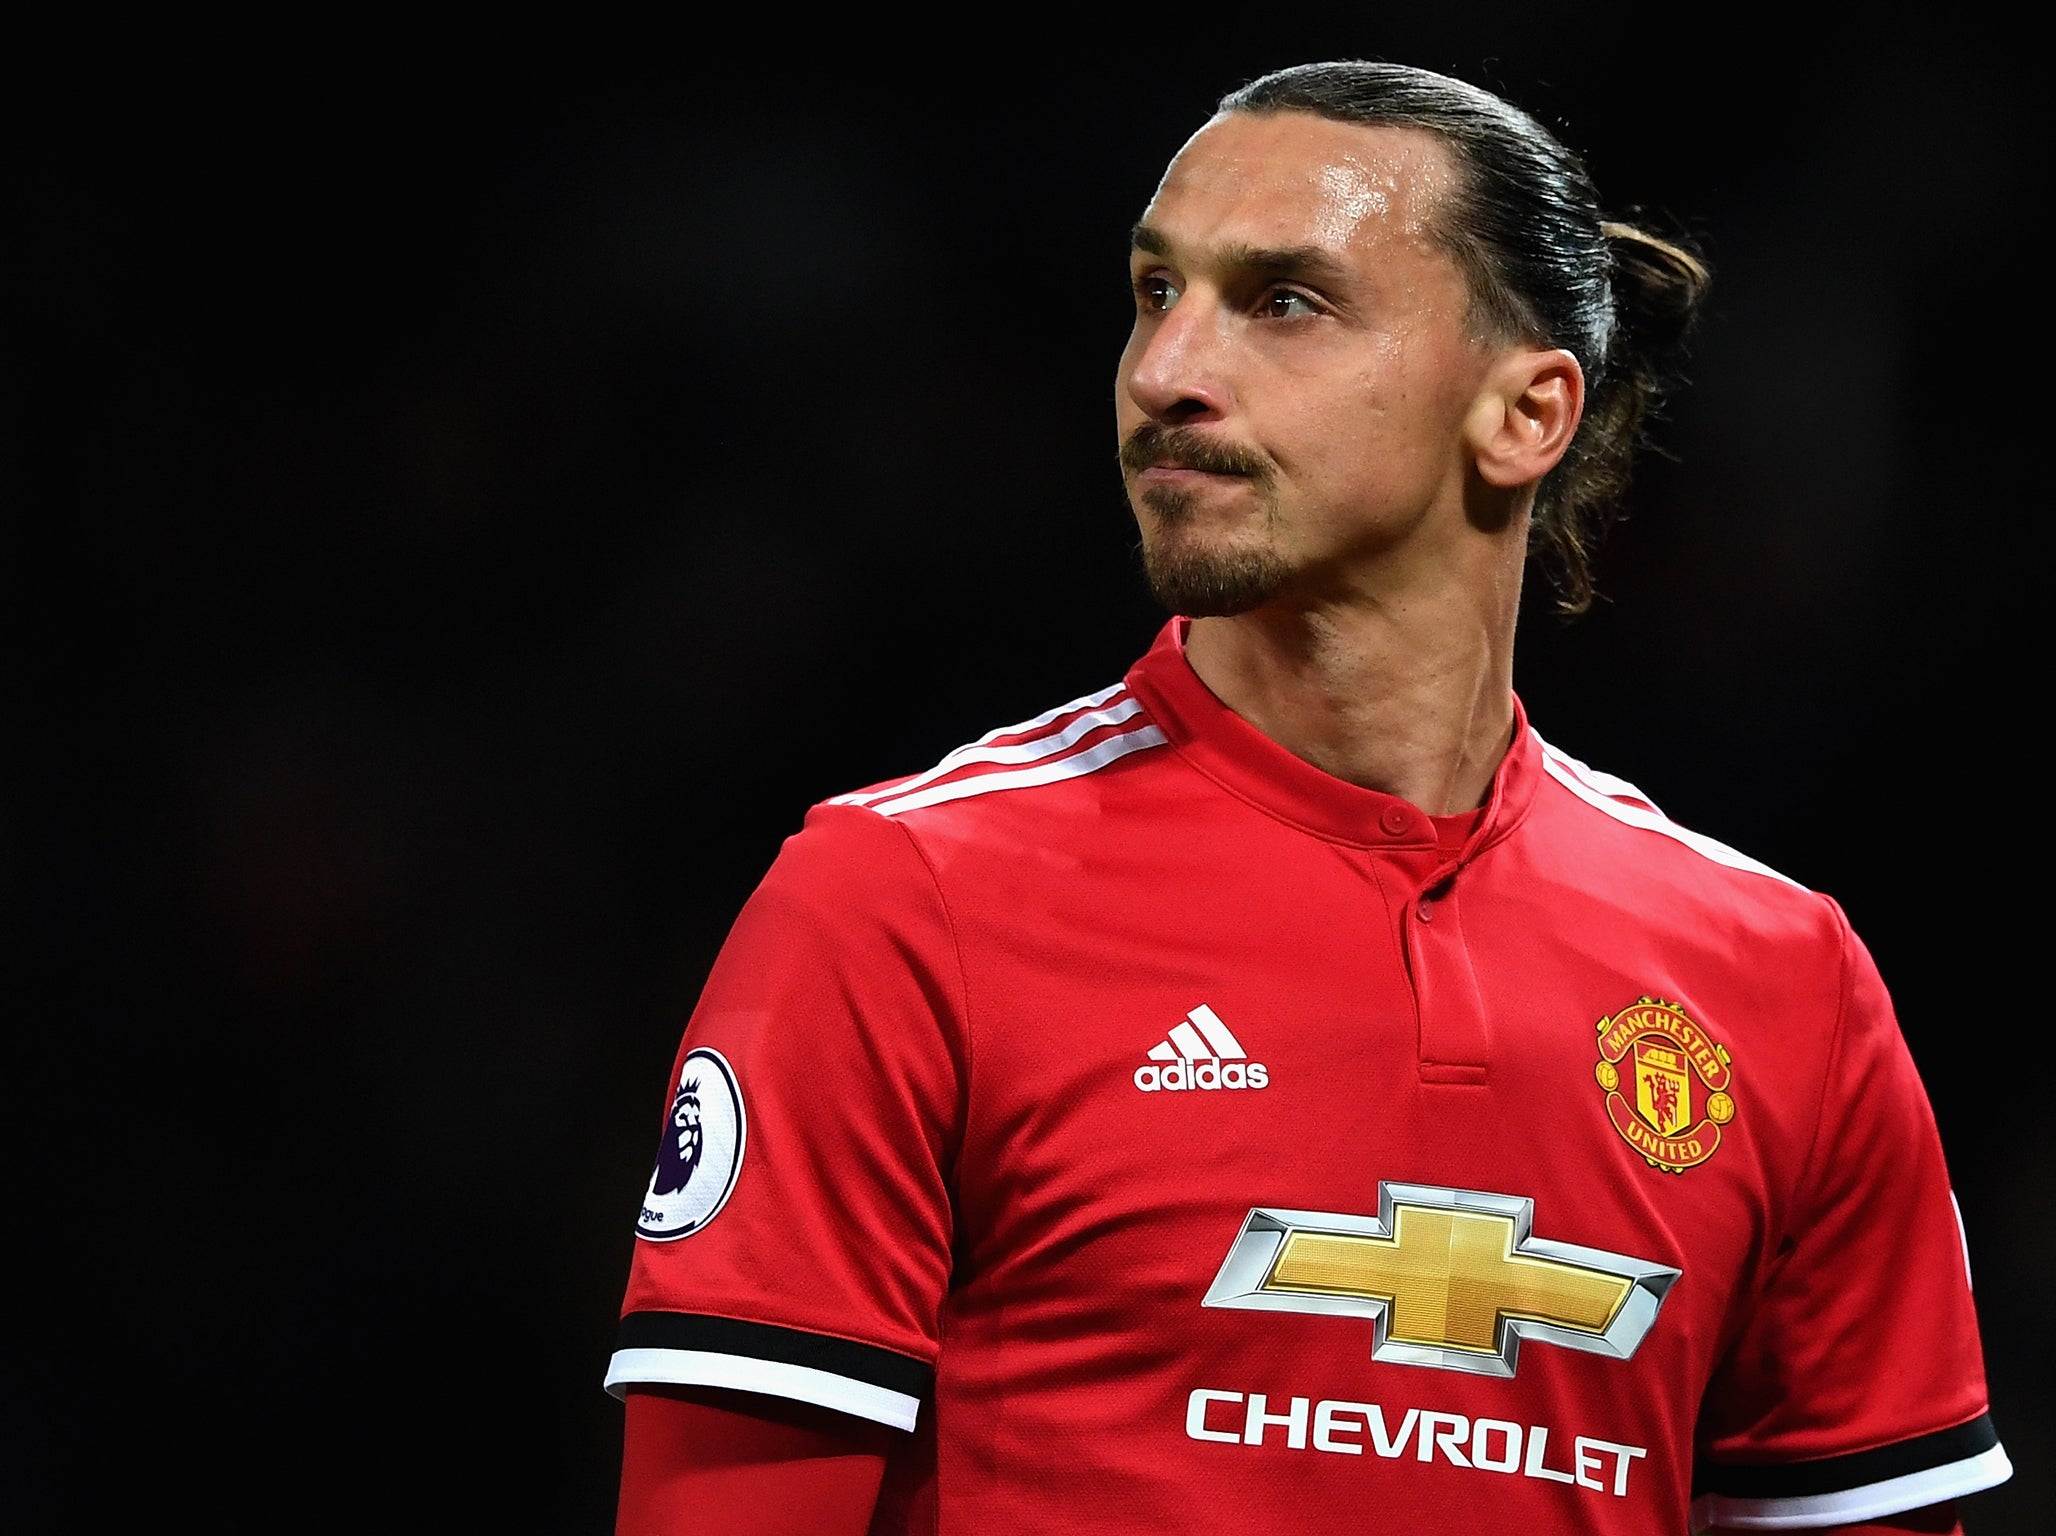 Zlatan Ibrahimovic once again compares himself to a lion after returning from a knee injury in Newcastle win